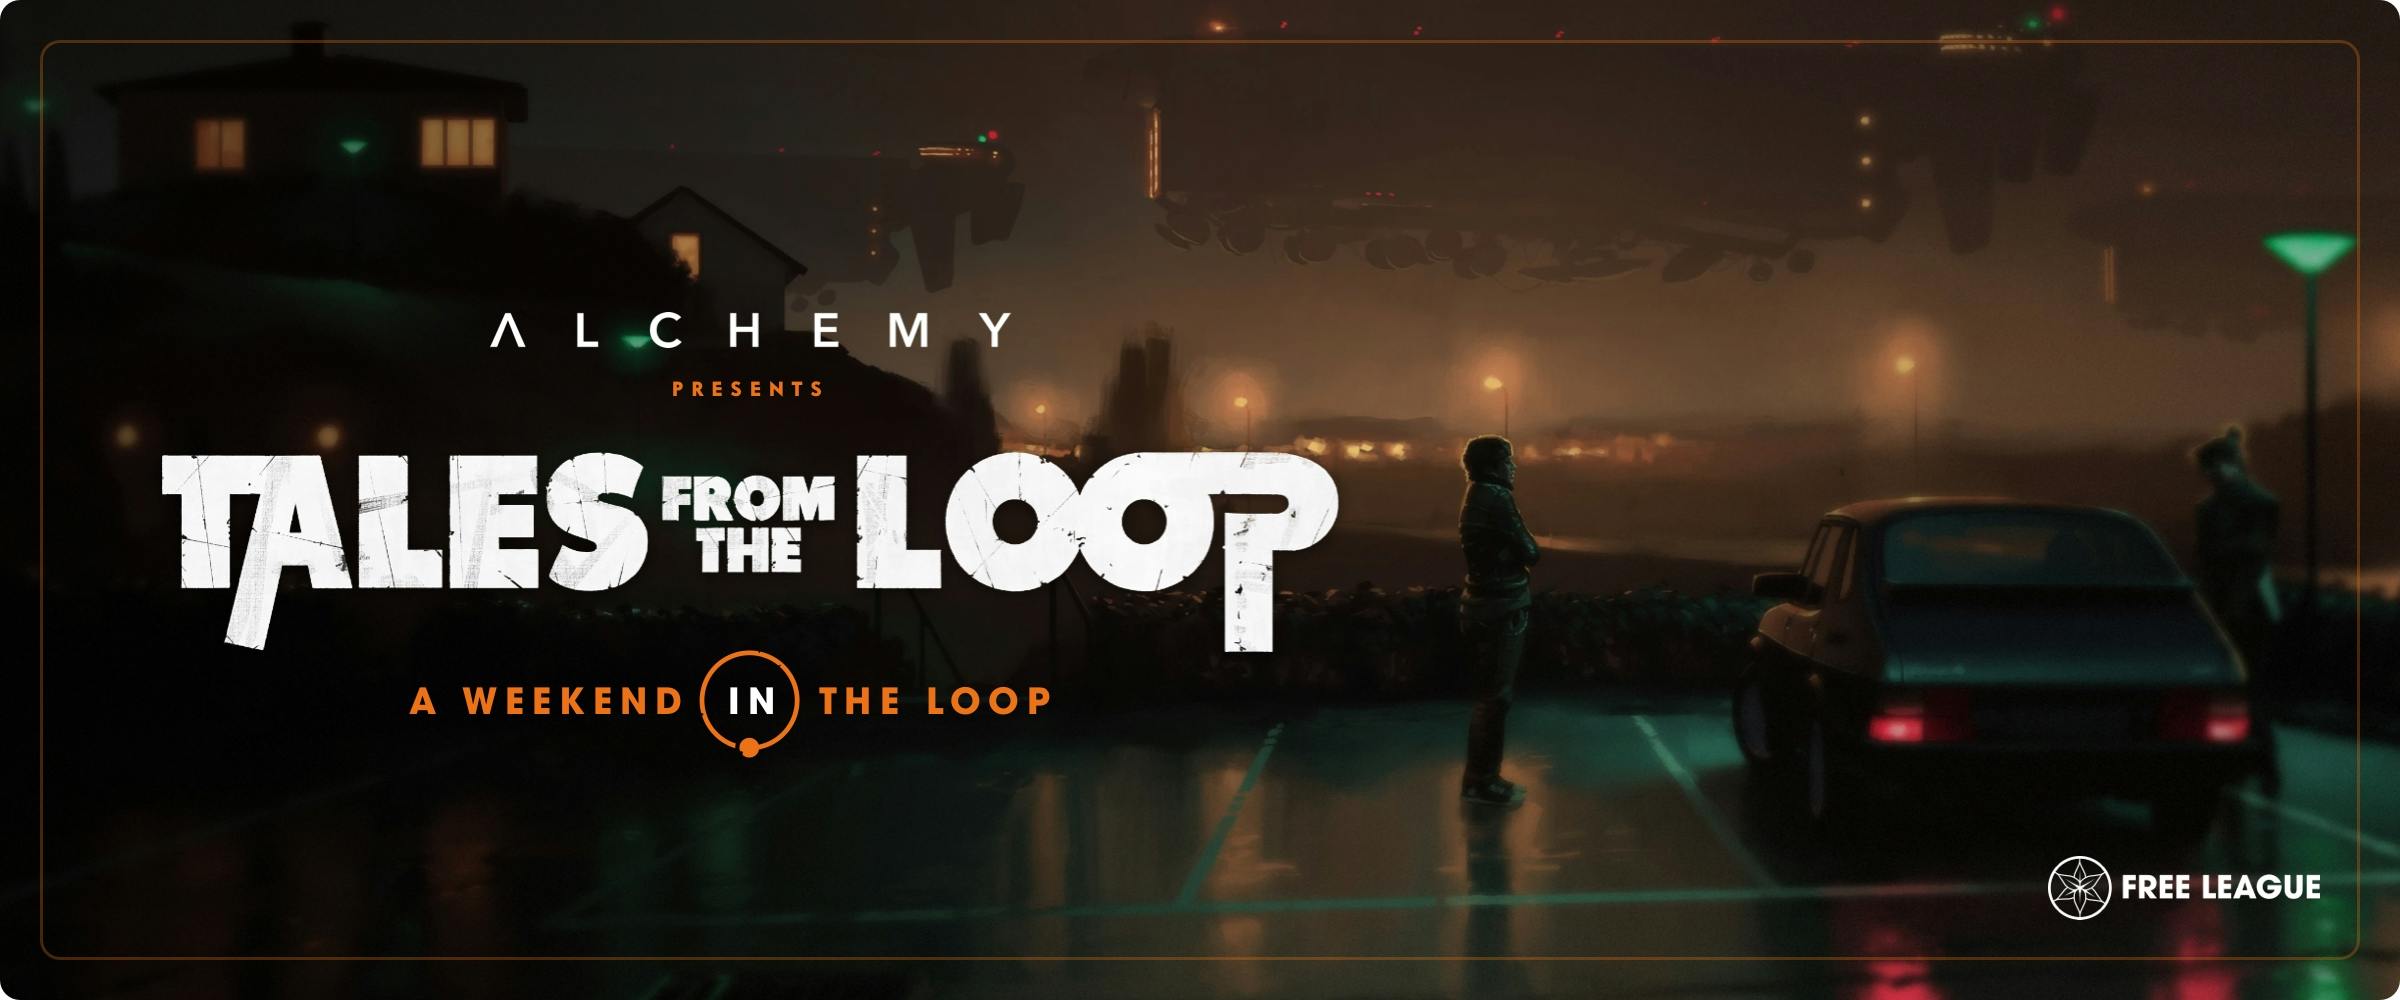 Tales from the Loop X Alchemy